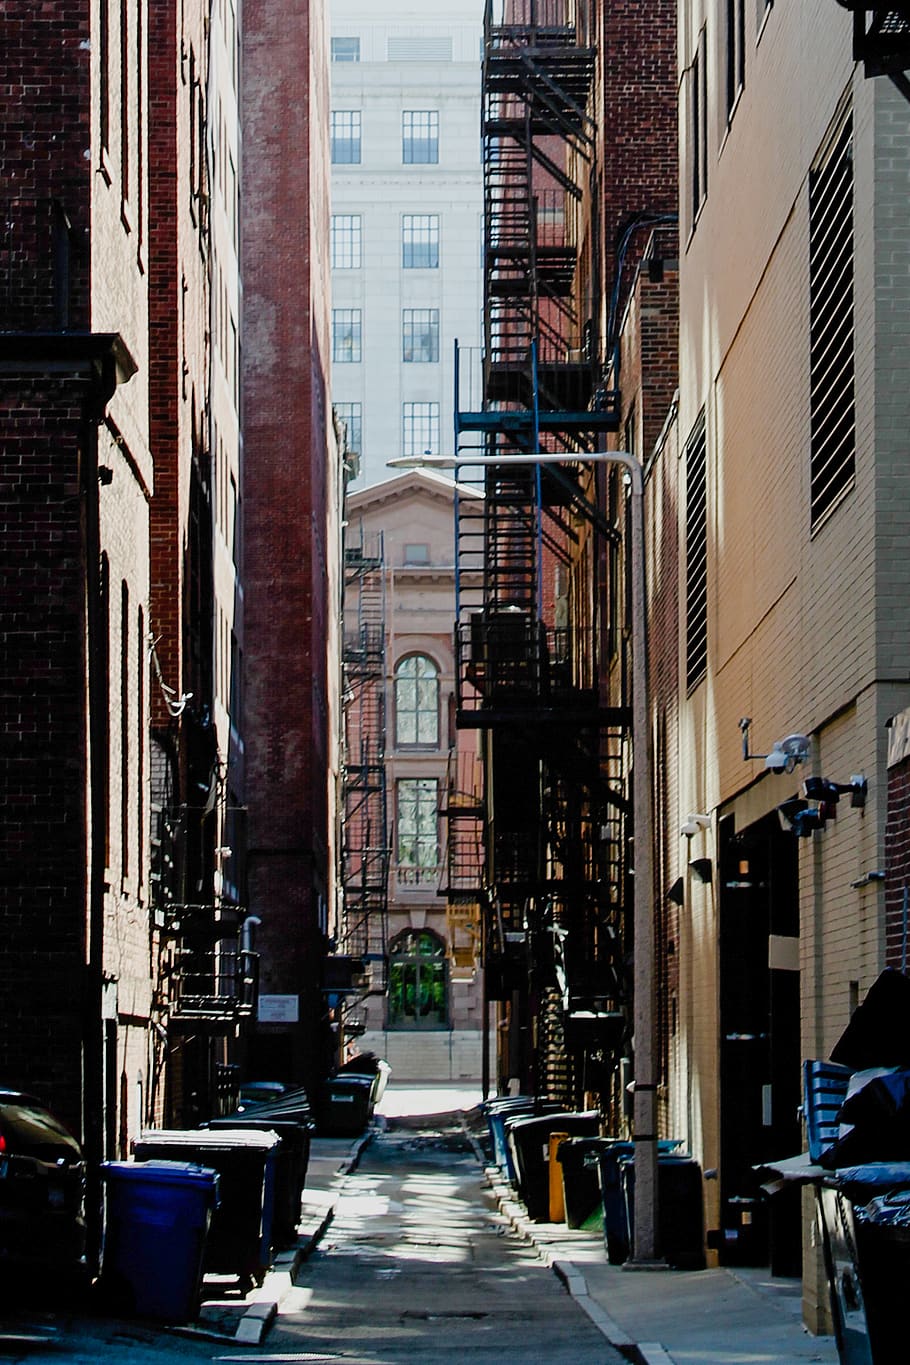 city, fire, escape, buildings, alley, windows, apartments, brick, tall, stairs